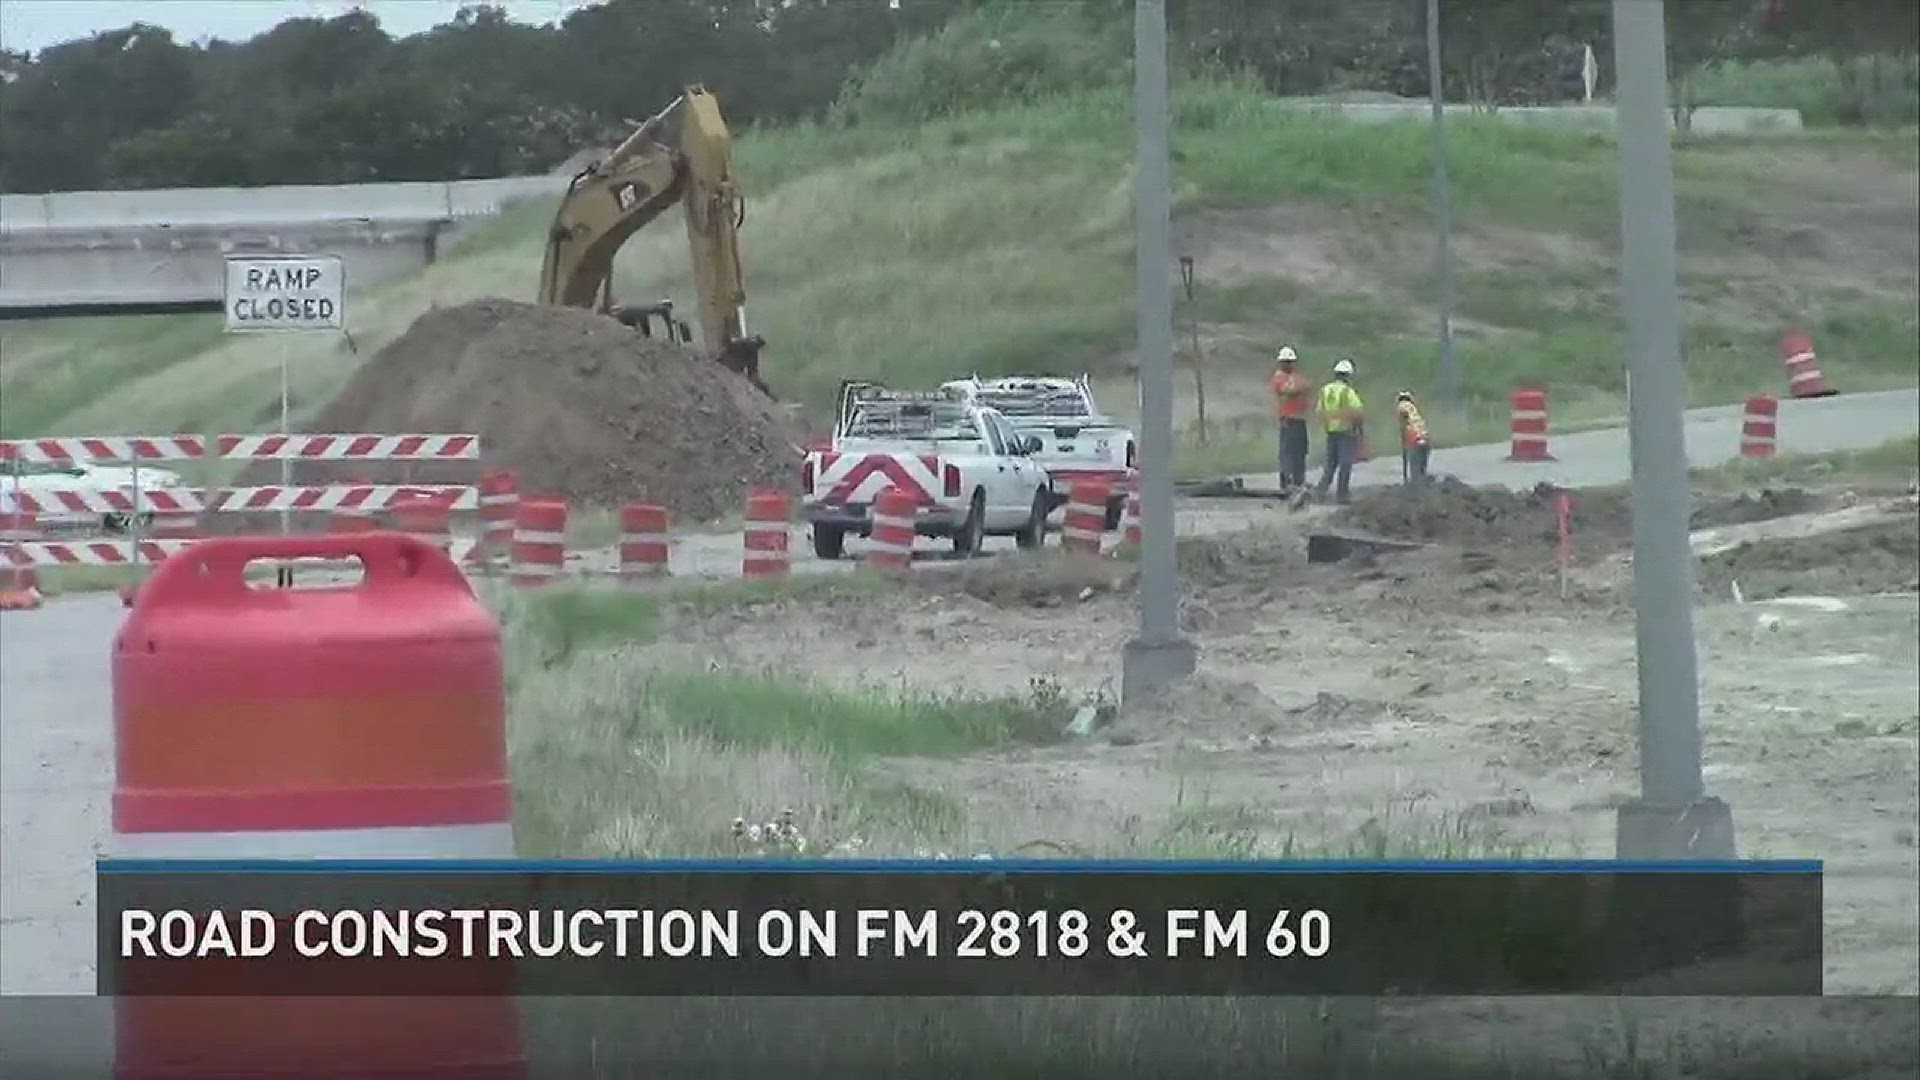 Crews working on the diverging diamond interchange project are making changes to ramps.